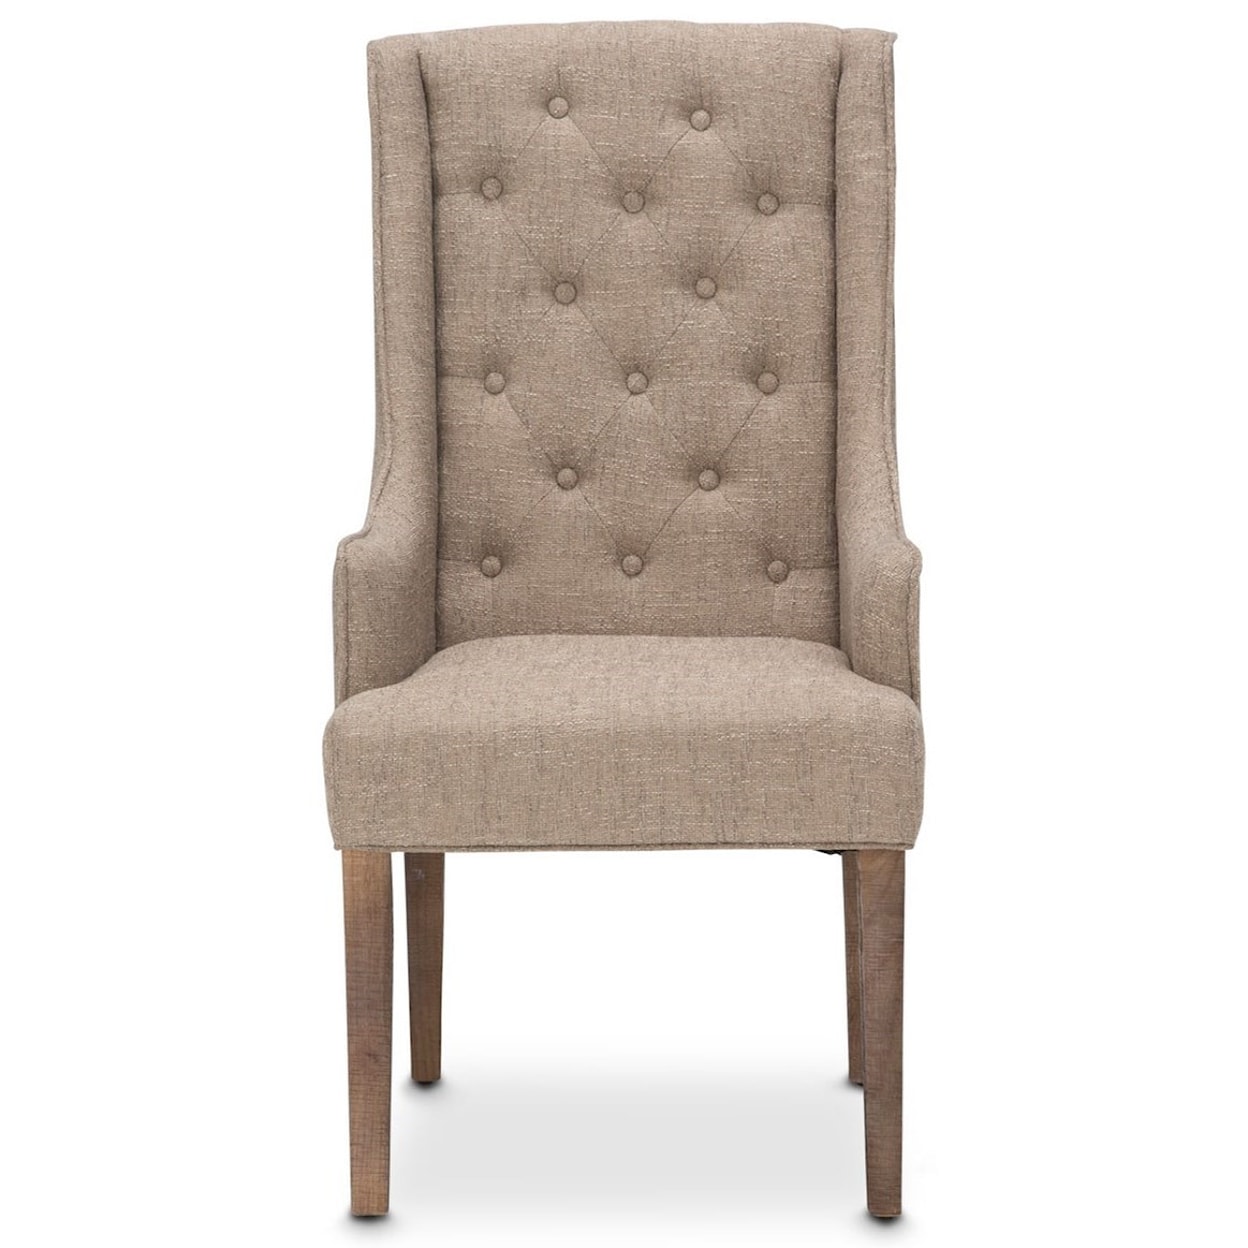 Michael Amini Hudson Ferry Upholstered Arm Chair